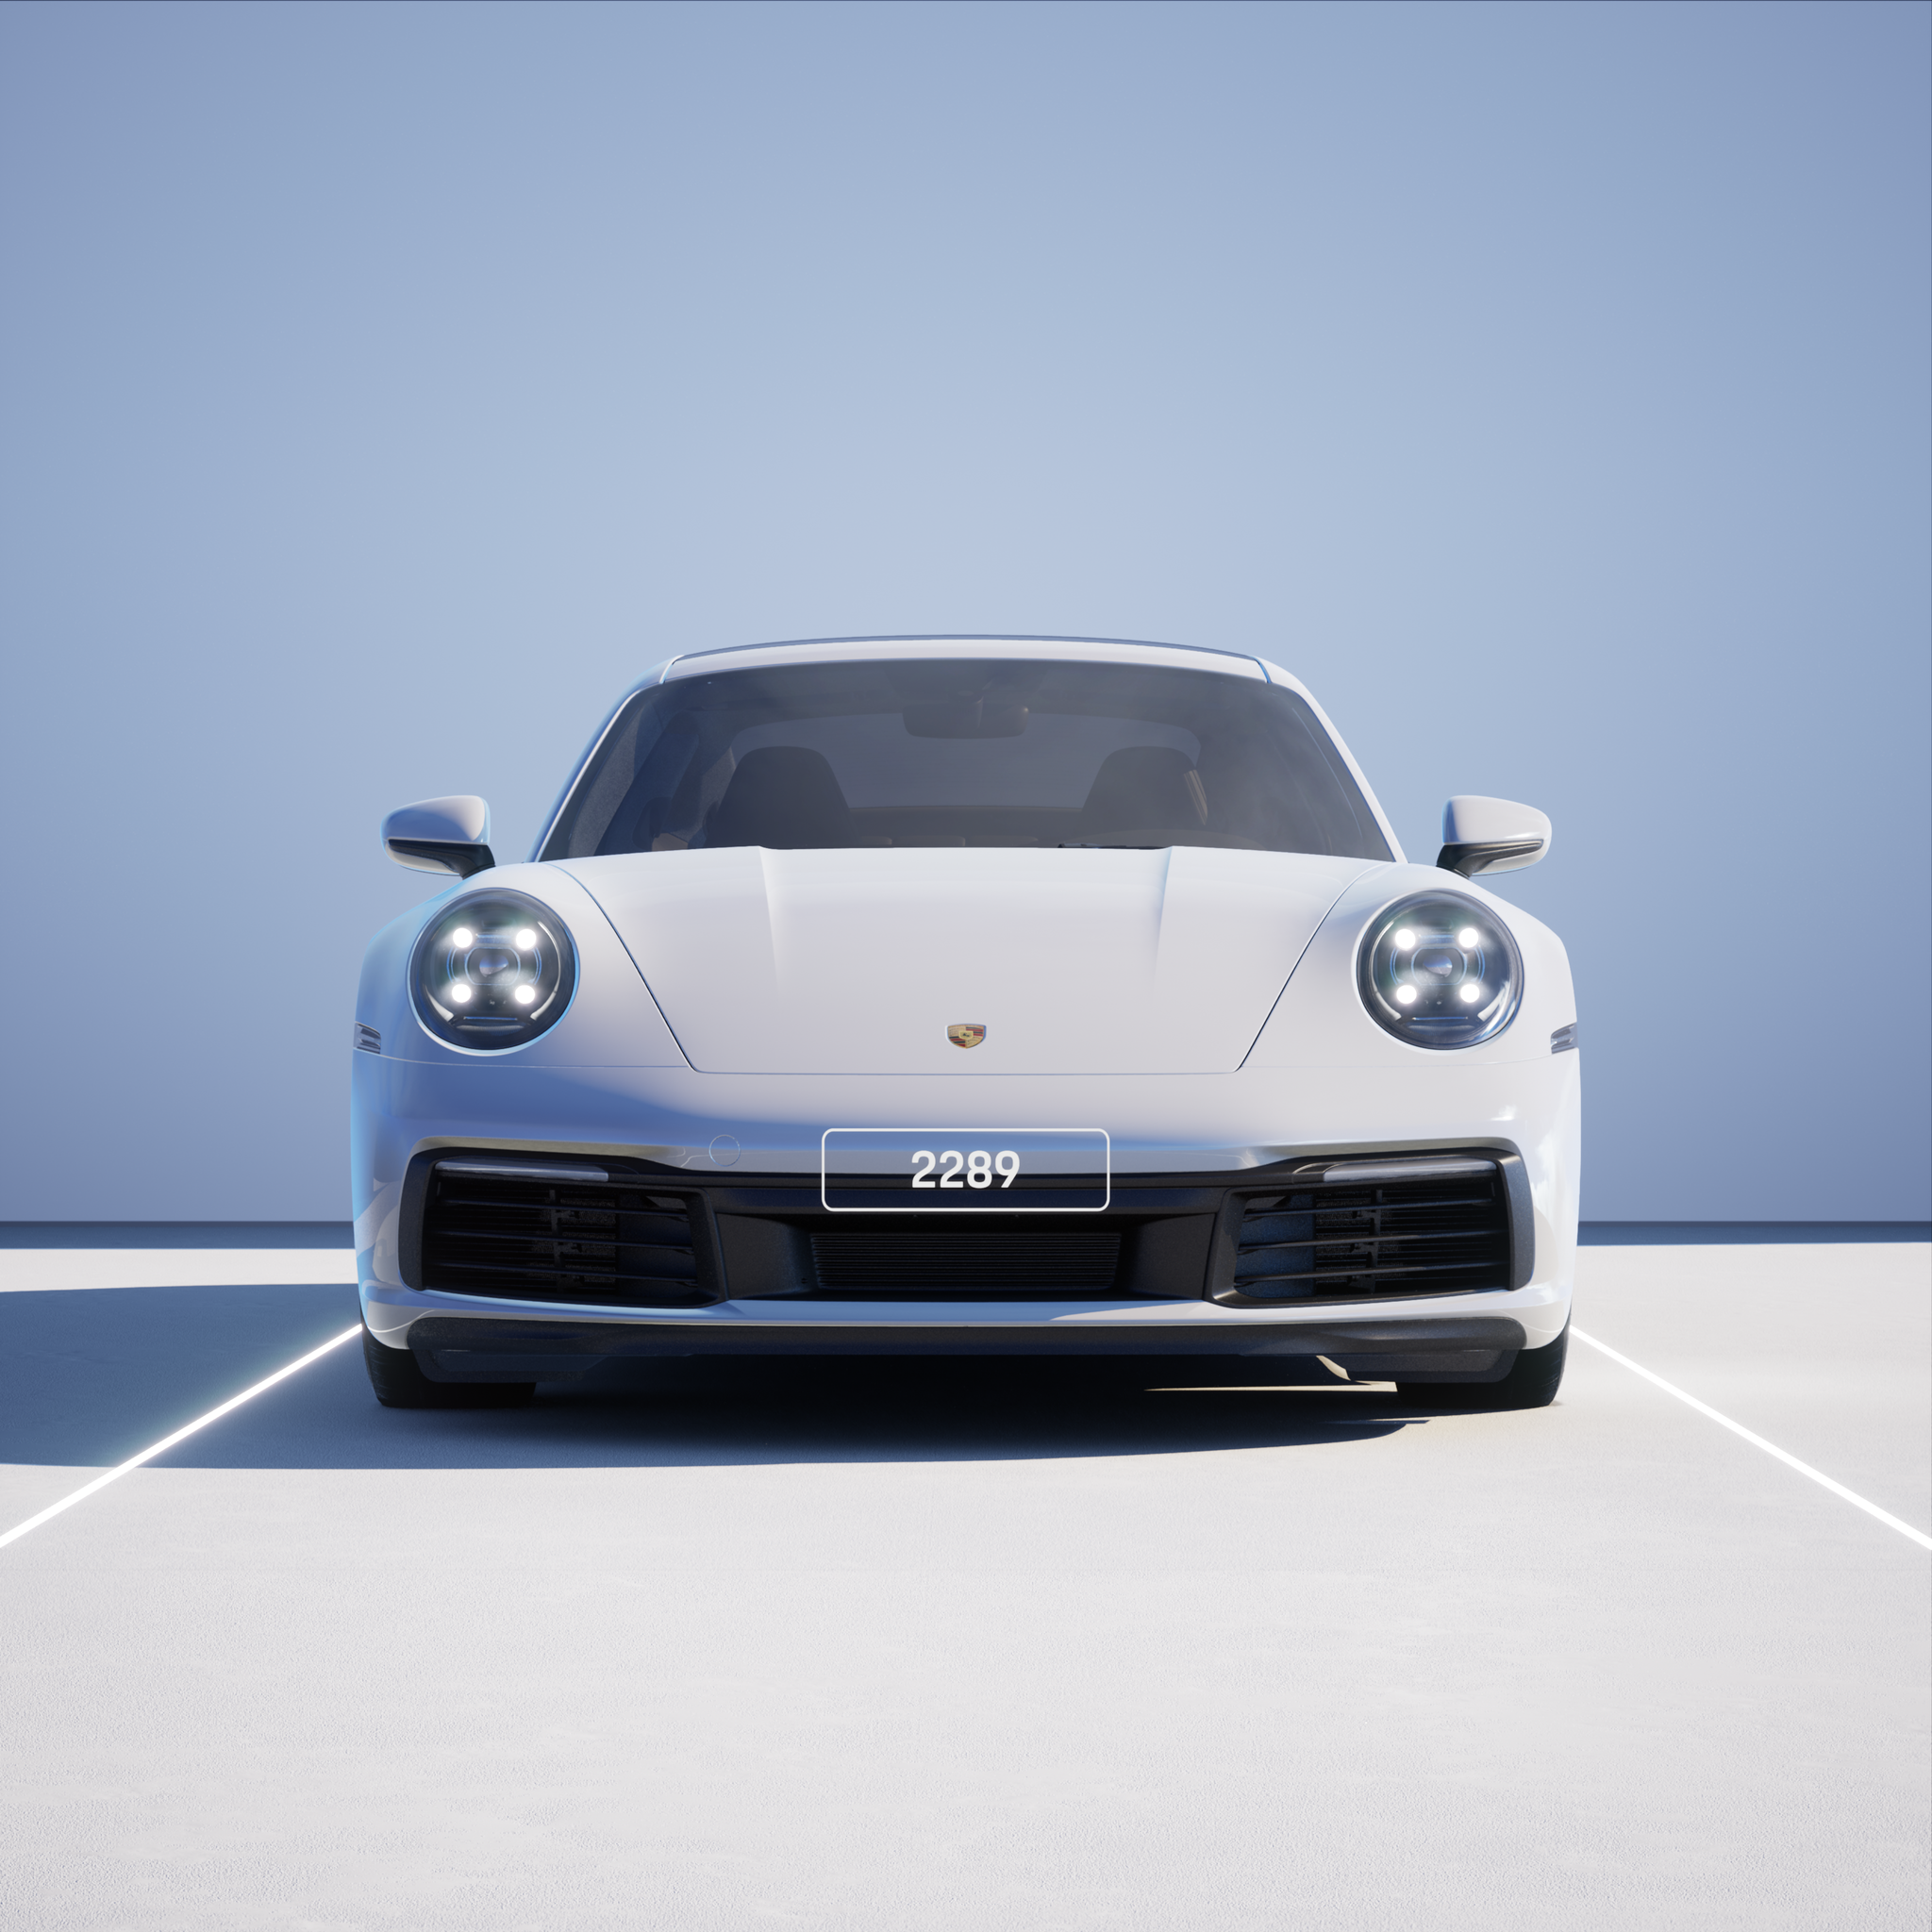 The PORSCHΞ 911 2289 image in phase